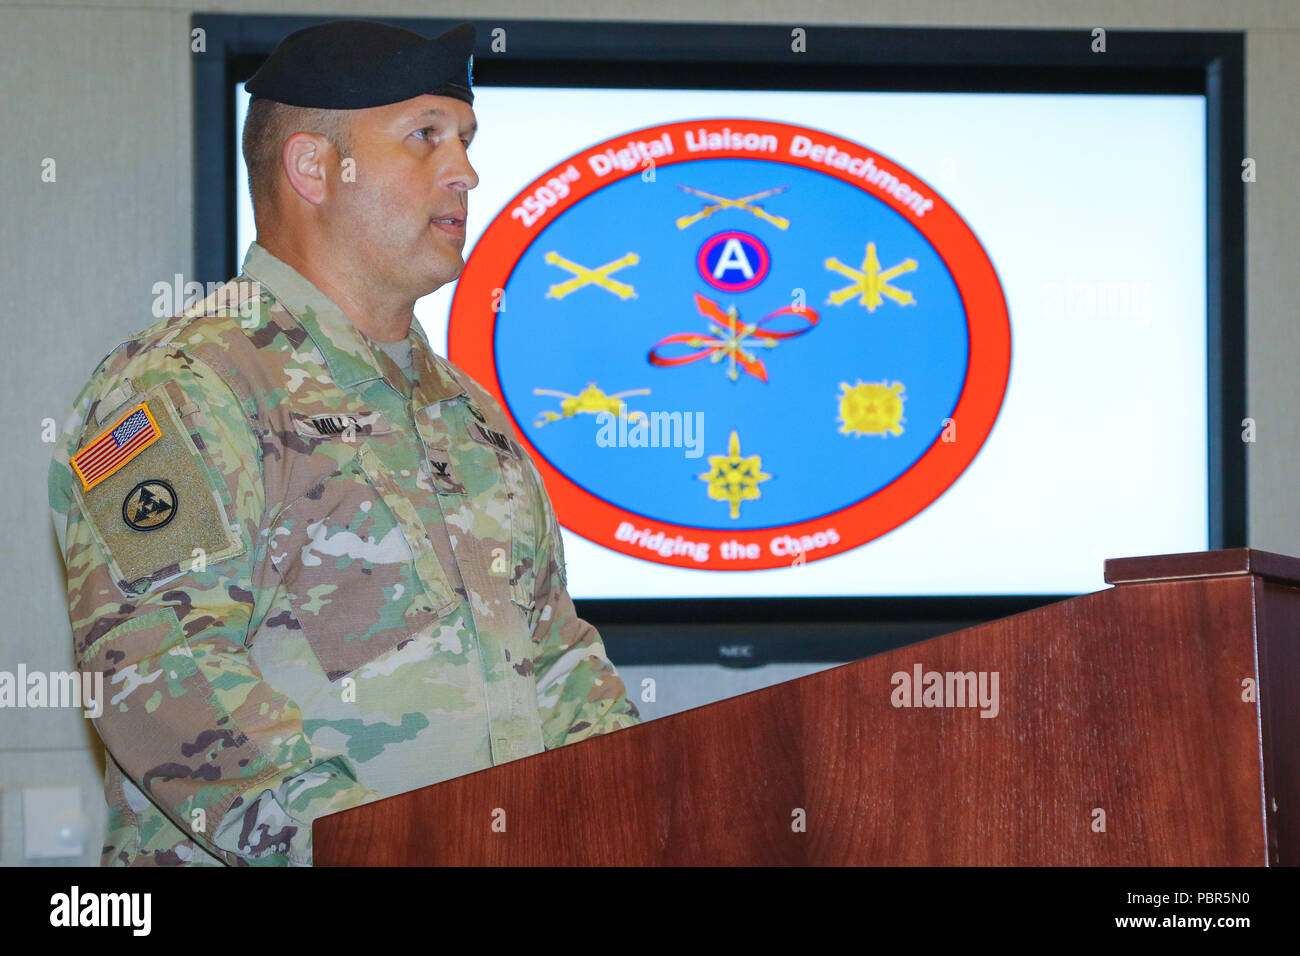 Col. Douglas W. Mills, incoming commander of the 2503rd Digital Liaison Detachment, U.S. Army Central, shares his remarks during a change-of-command ceremony July 19, 2018, at Patton Hall on Shaw Air Force Base, S.C. (U.S. Army photo by Sgt. Von Marie Donato) Stock Photo